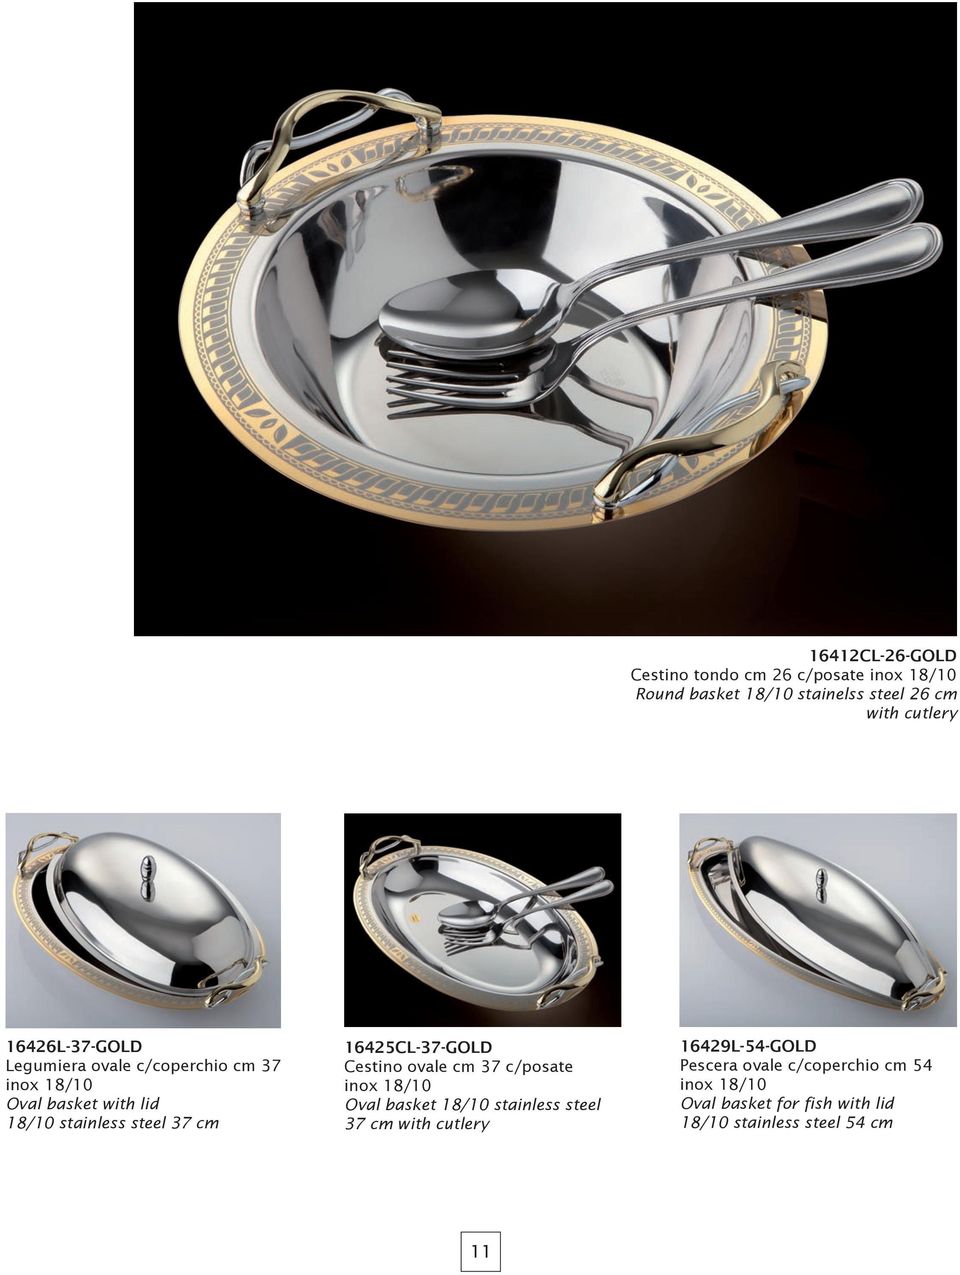 16425CL-37-GOLD Cestino ovale cm 37 c/posate inox 18/10 Oval basket 18/10 stainless steel 37 cm with cutlery